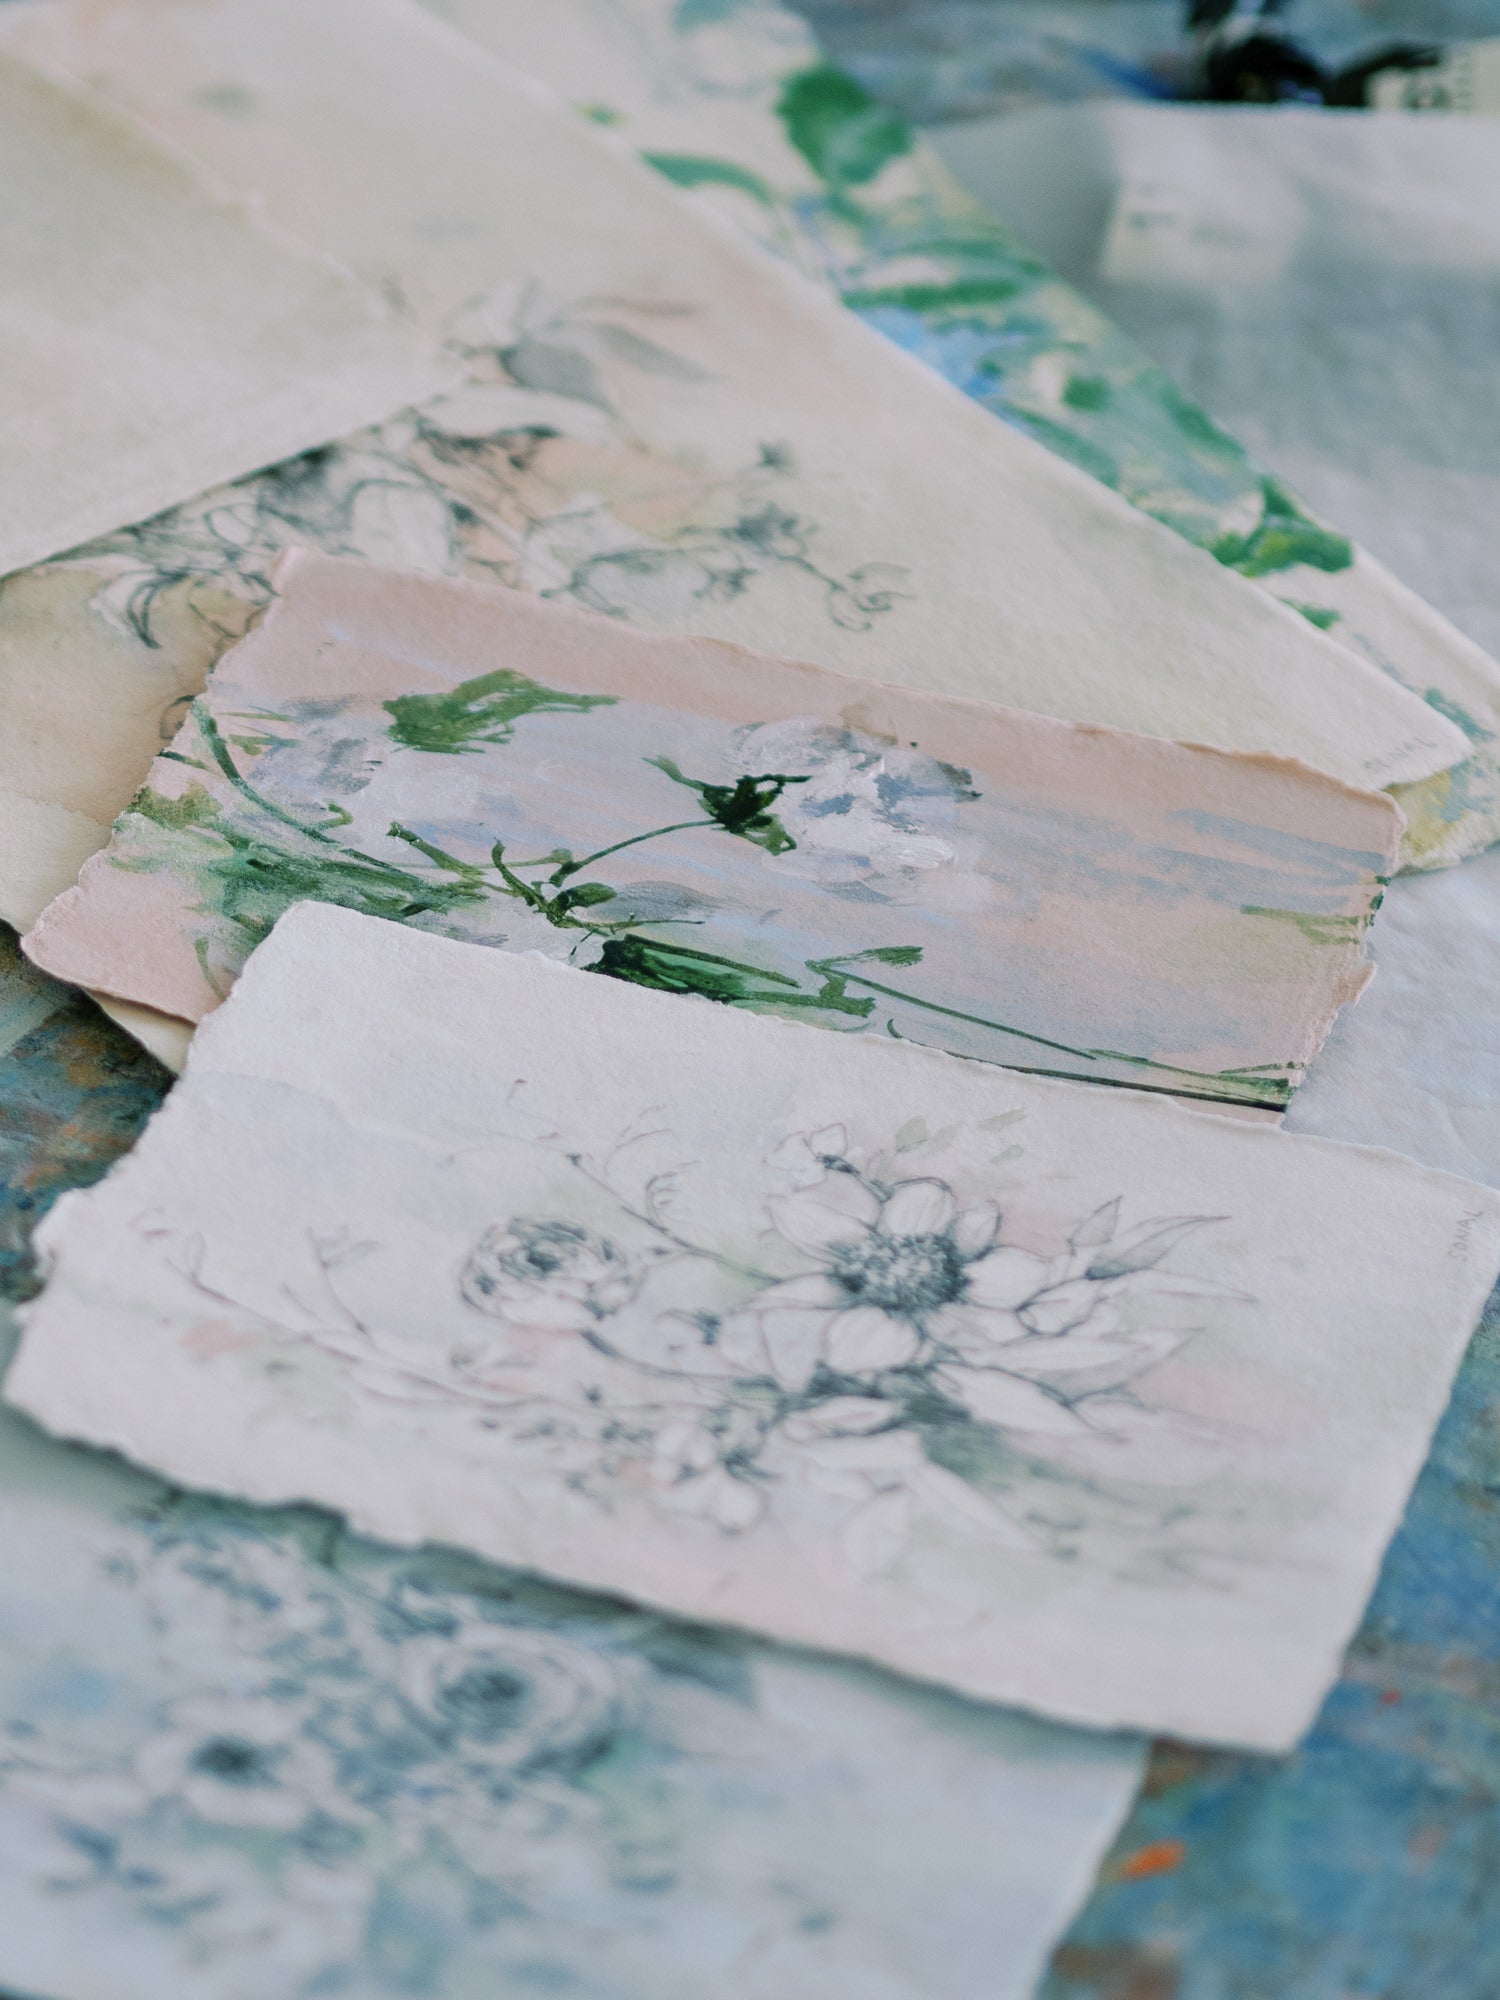 Beginners Papermaking Collection // MADE TO ORDER — SHare studios